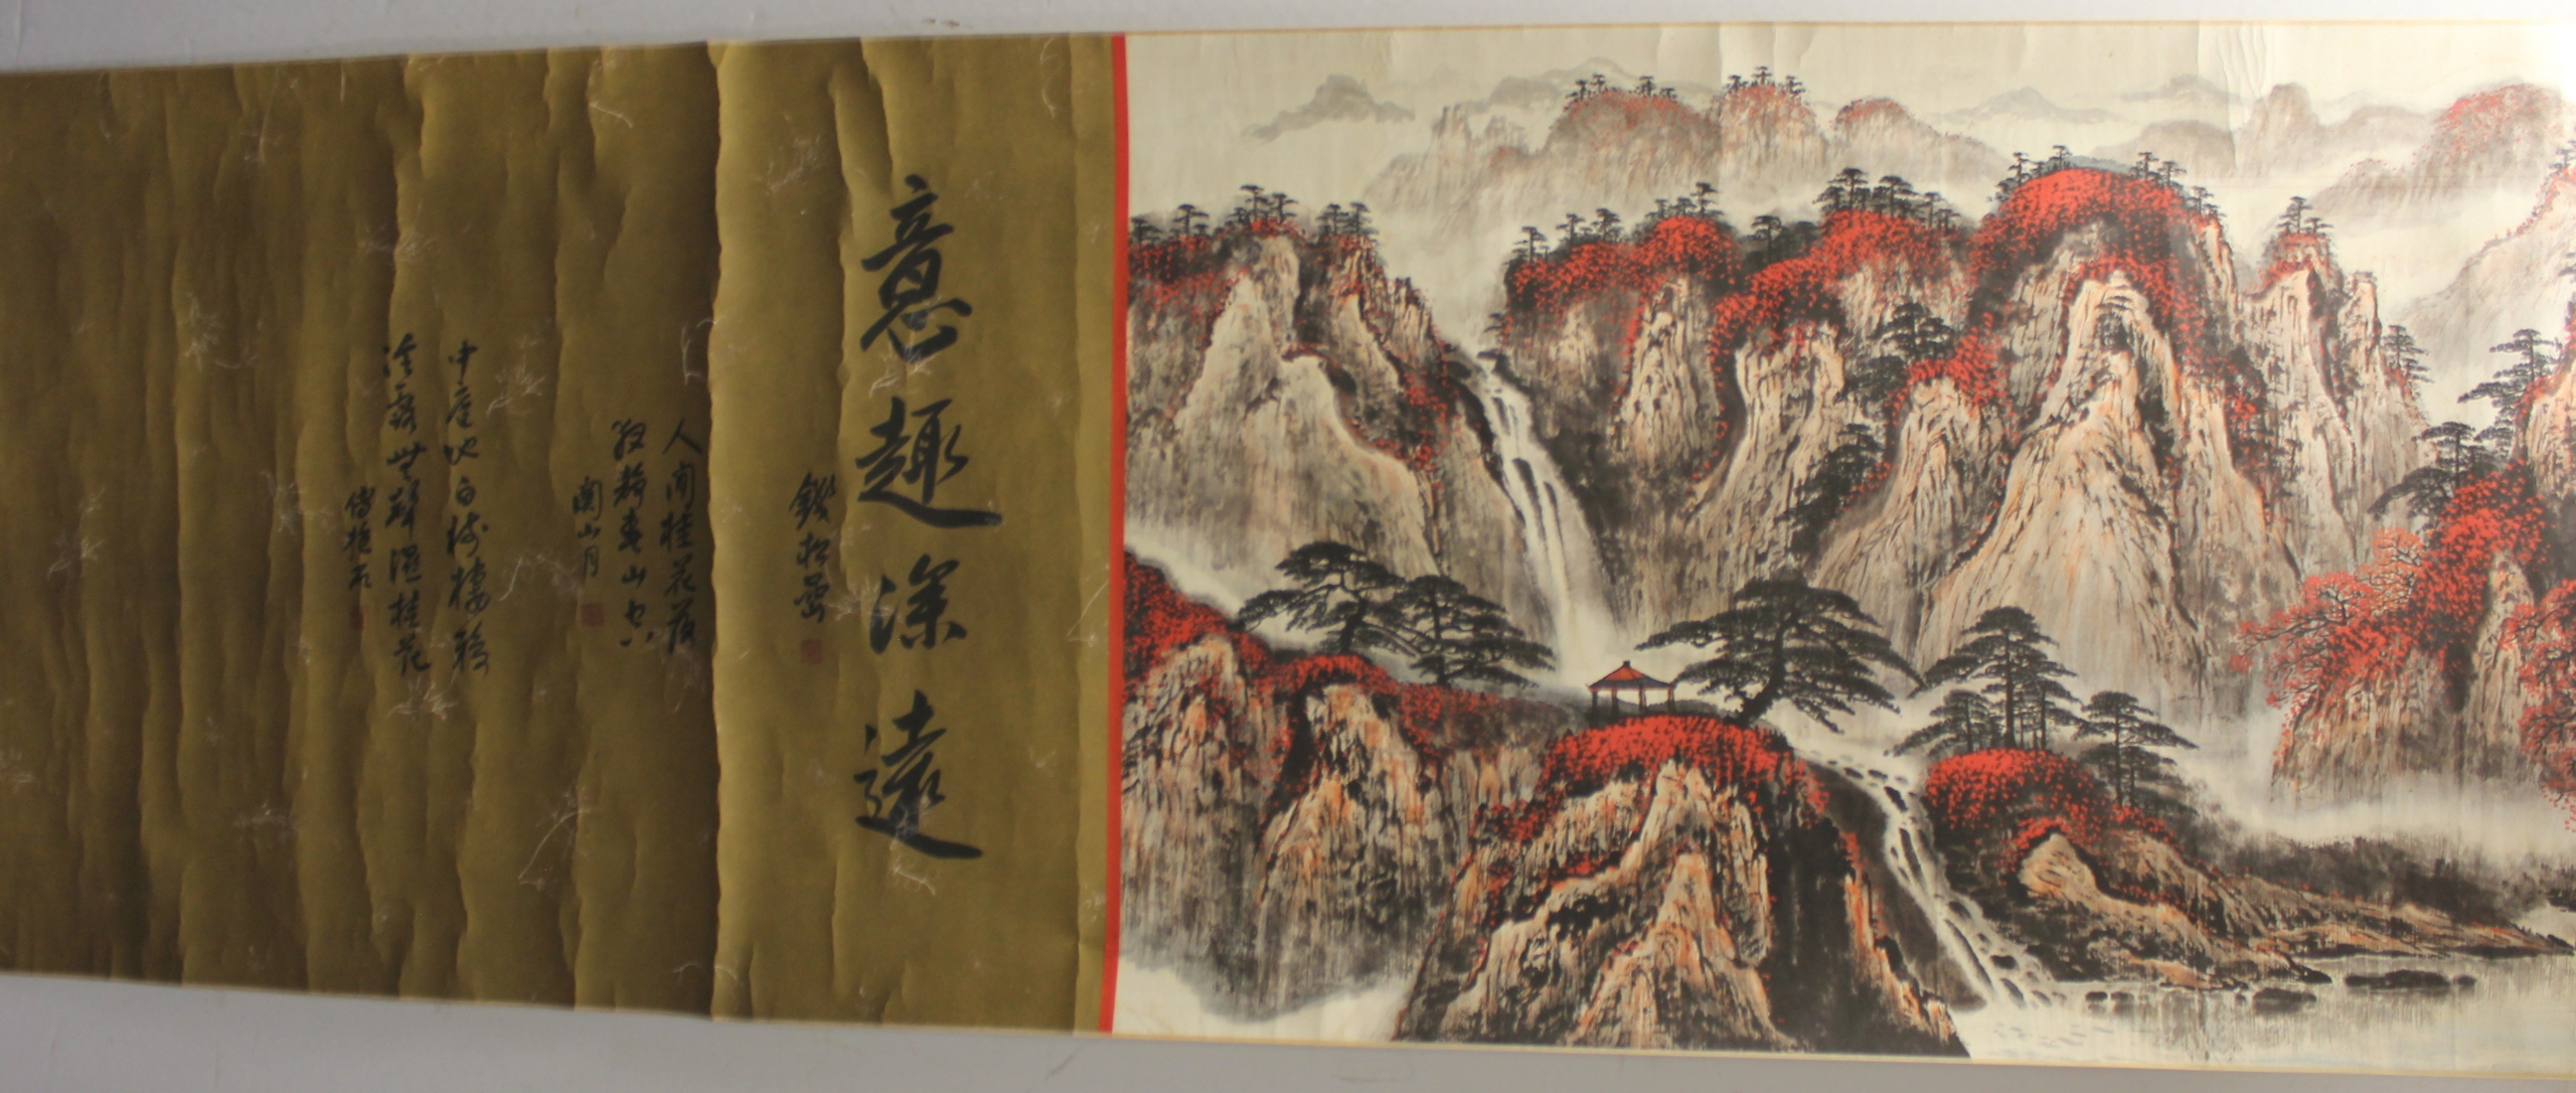 Reproduction Chinese scroll painting (print) of an extensive mountainous lake scene with boats, - Image 7 of 9